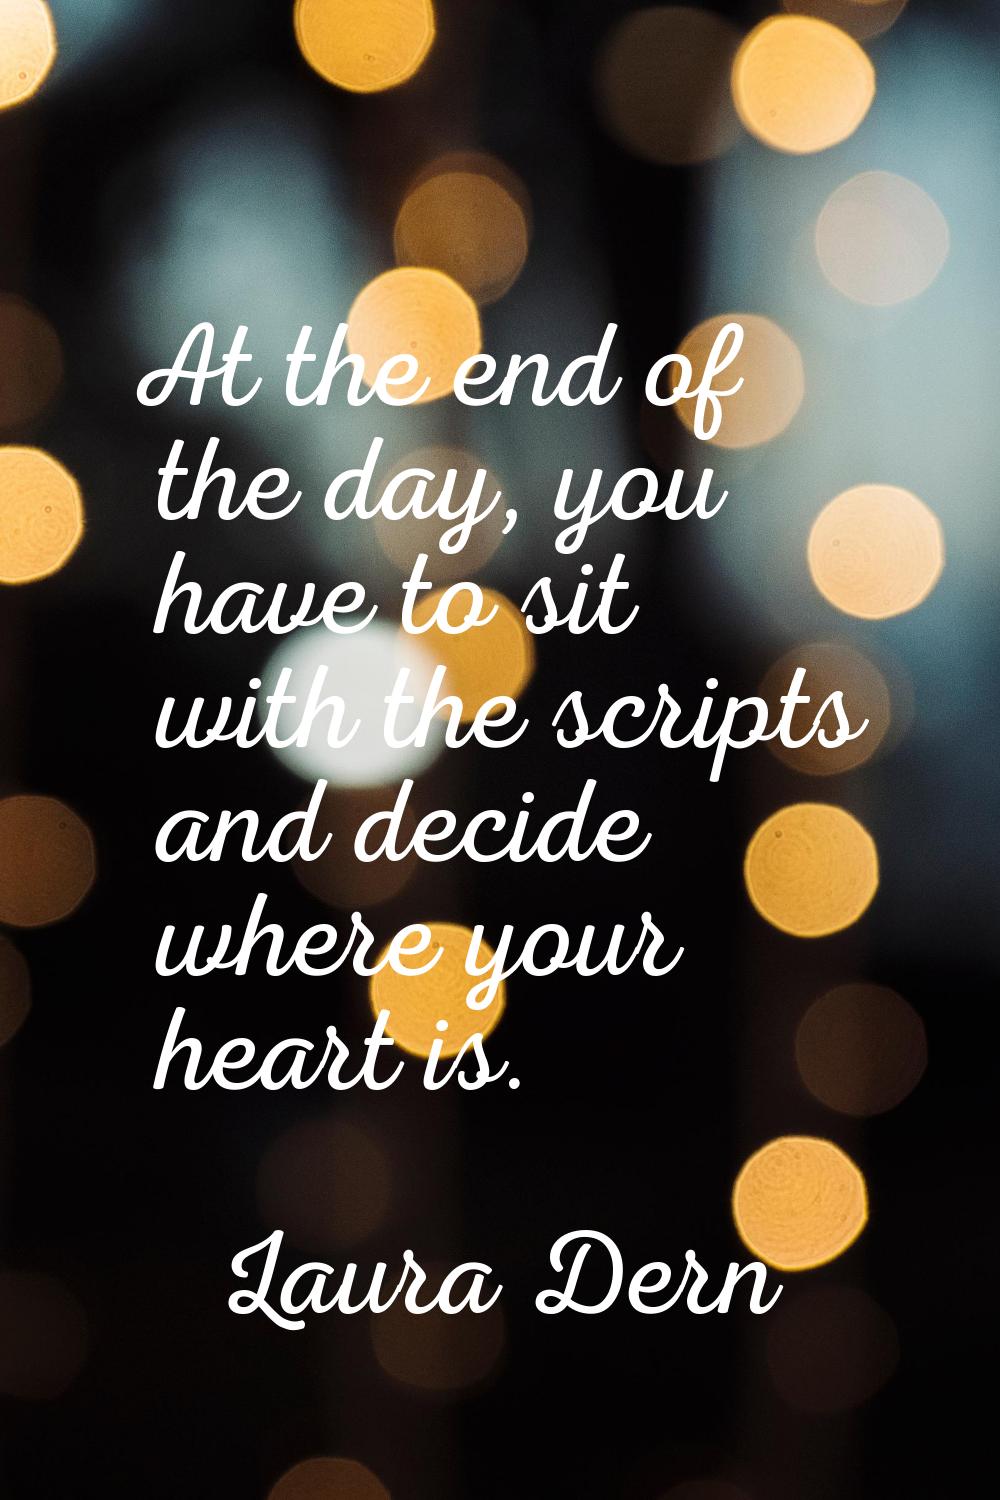 At the end of the day, you have to sit with the scripts and decide where your heart is.